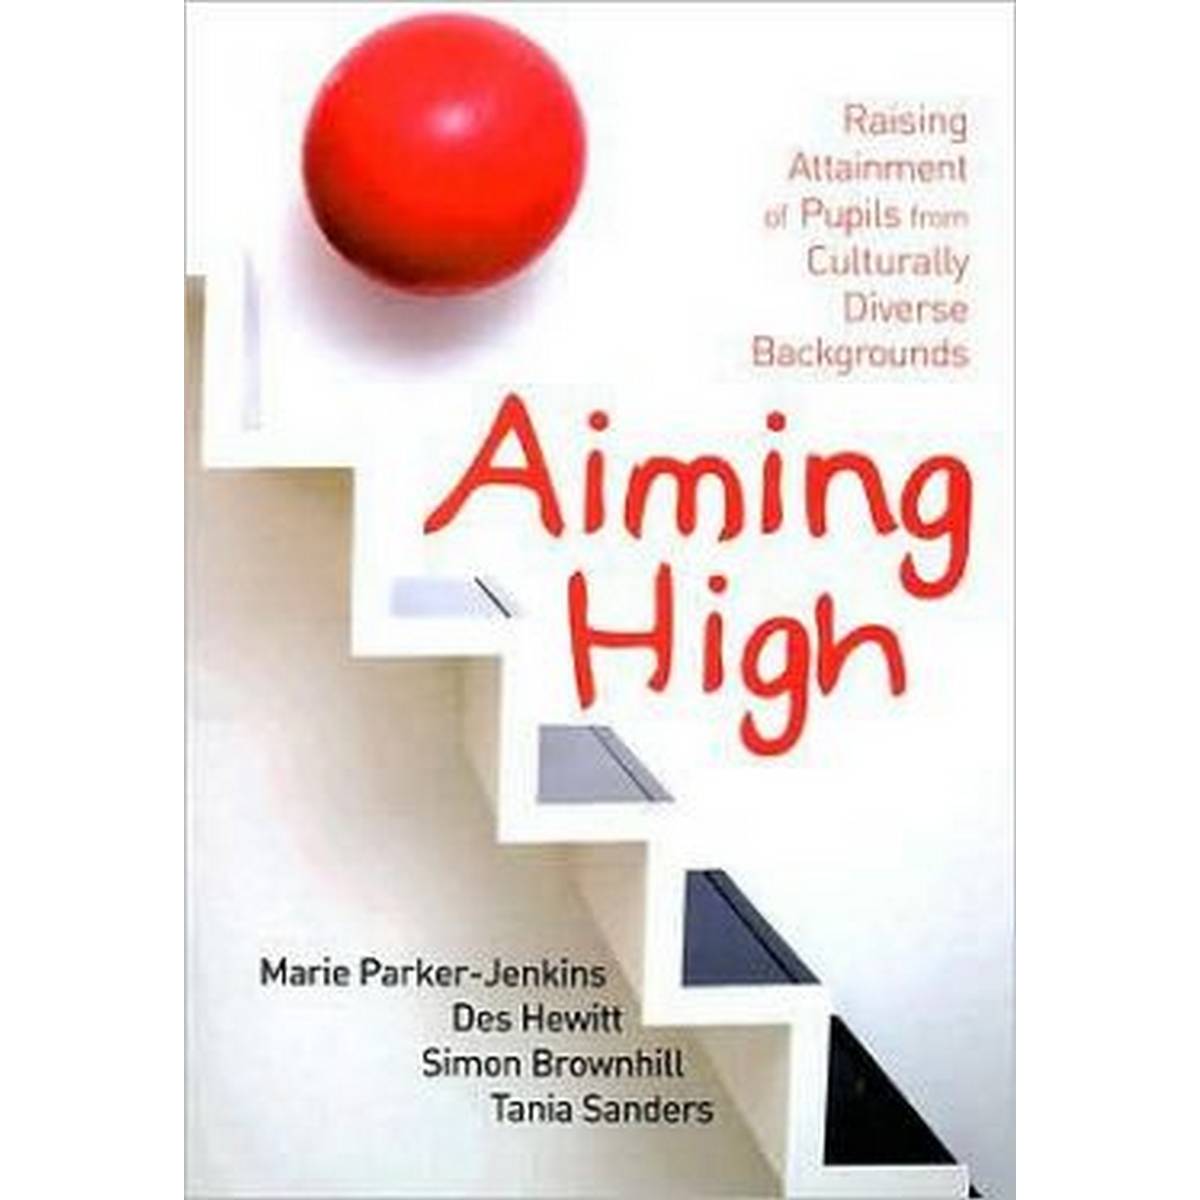 Aiming High: Raising Attainment of Pupils from Culturally-Diverse Backgrounds